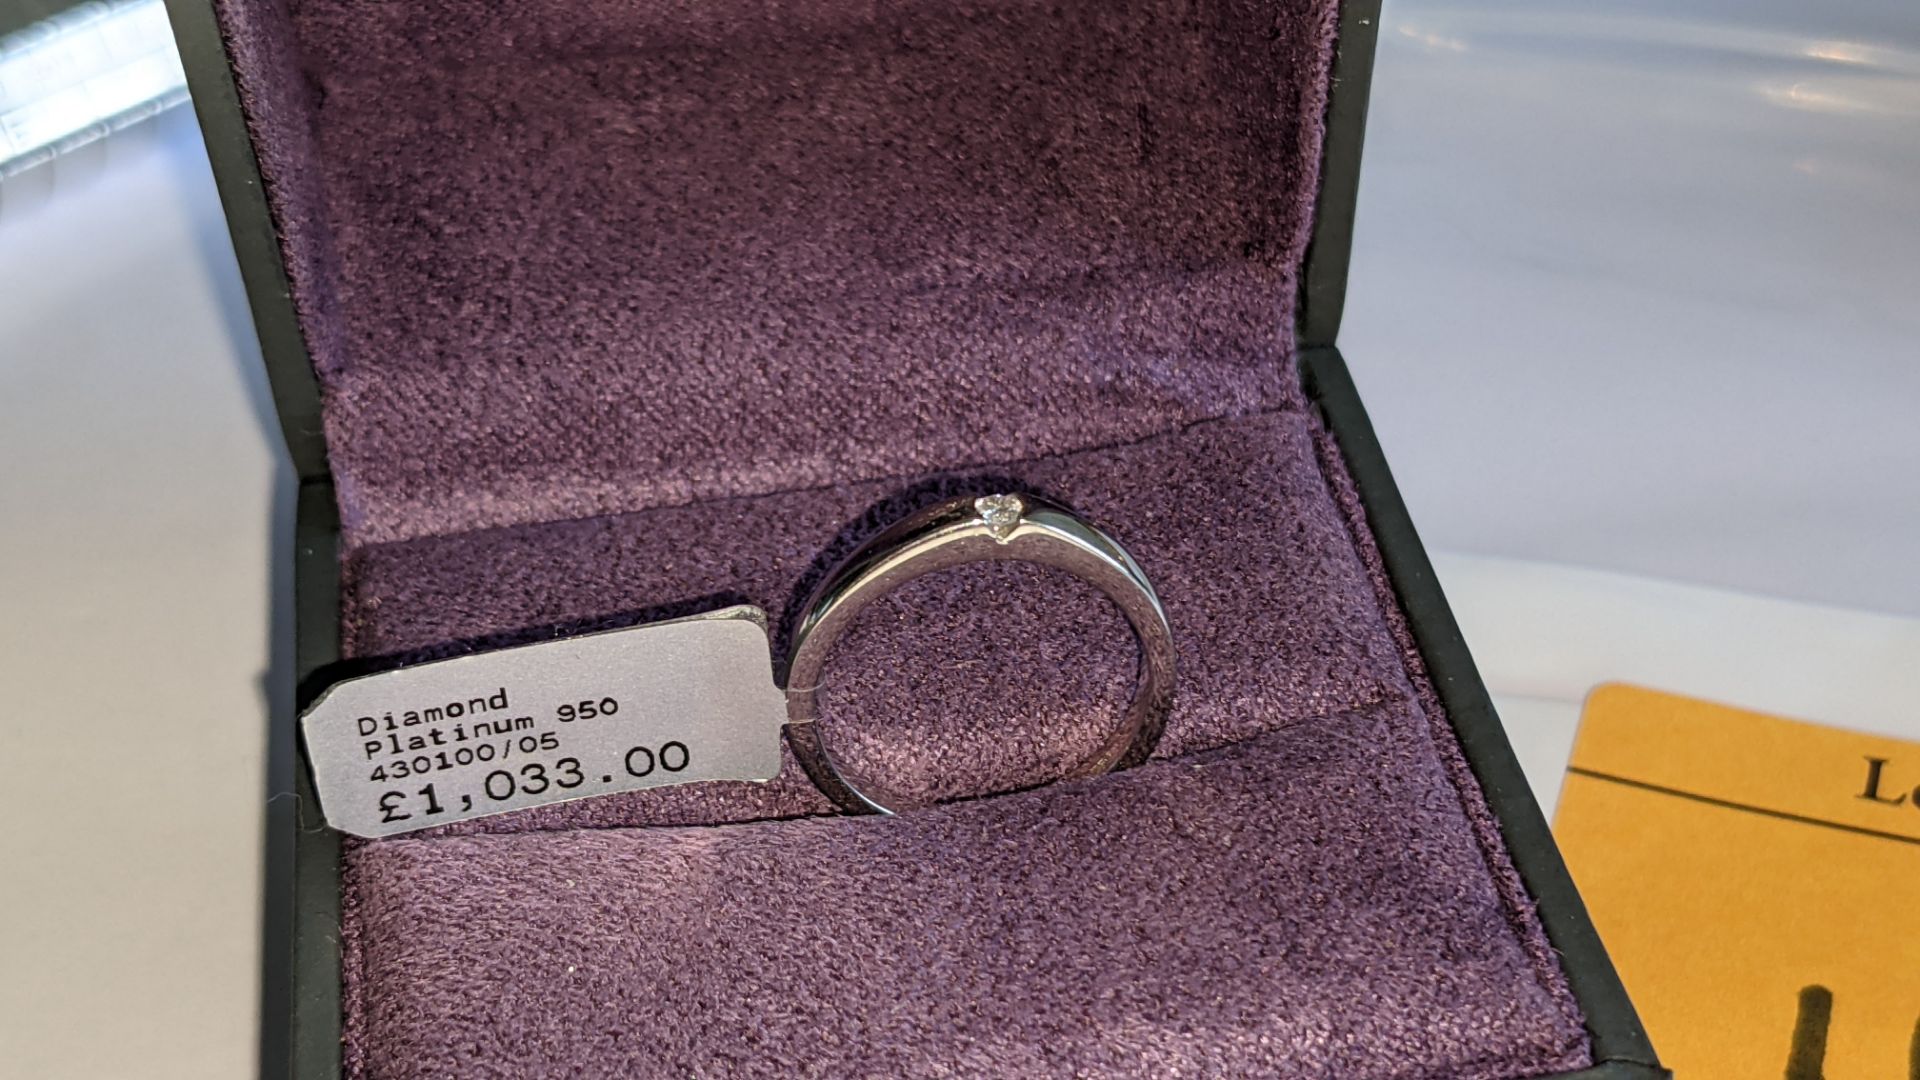 Platinum 950 ring with 0.05ct H/Si diamond. RRP £1,033 - Image 3 of 13